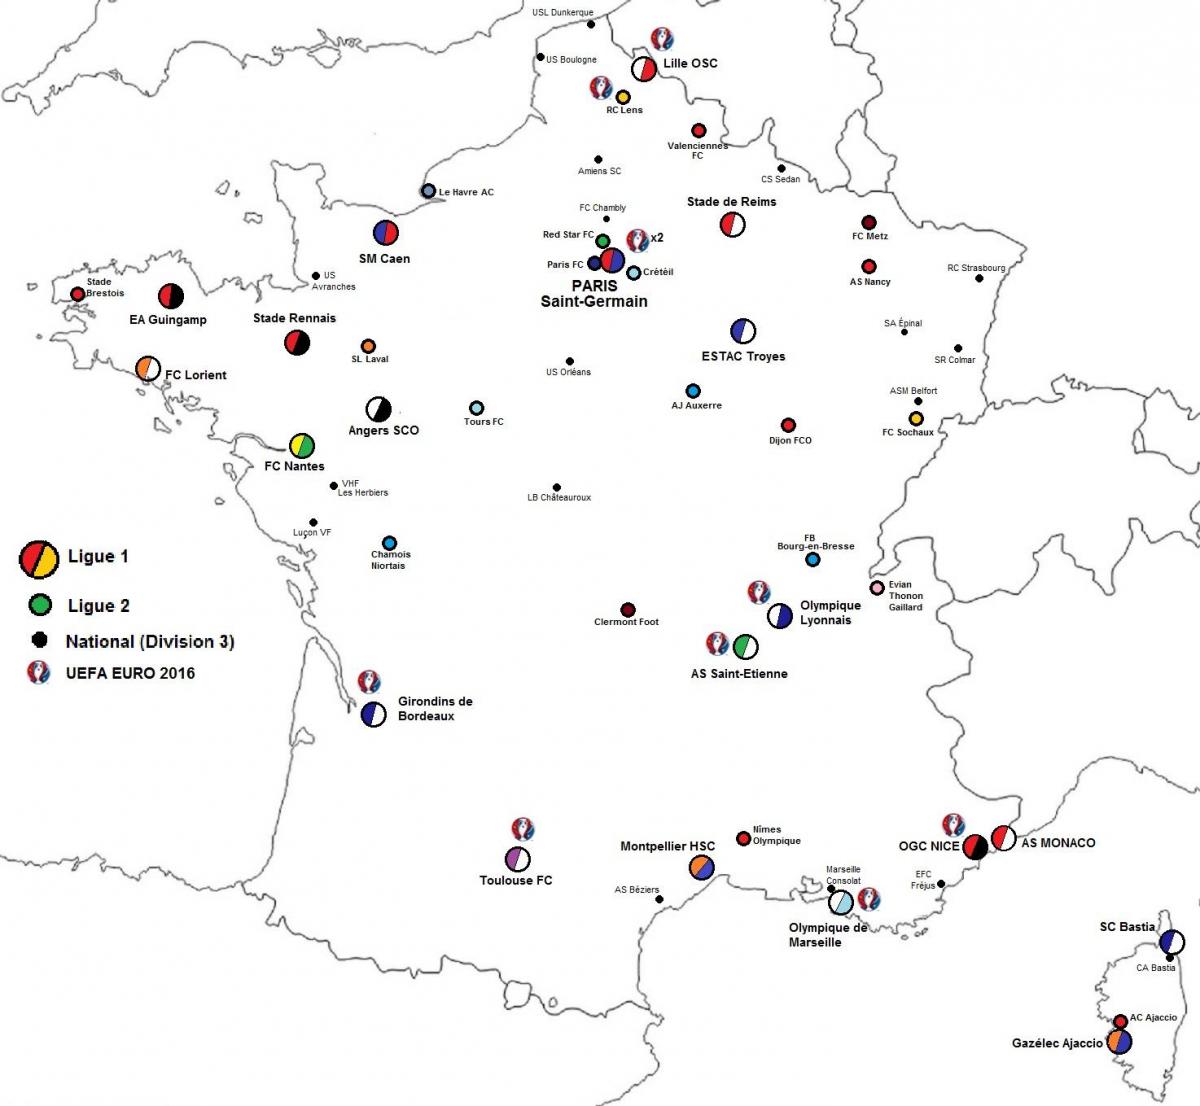 stadiums map of France